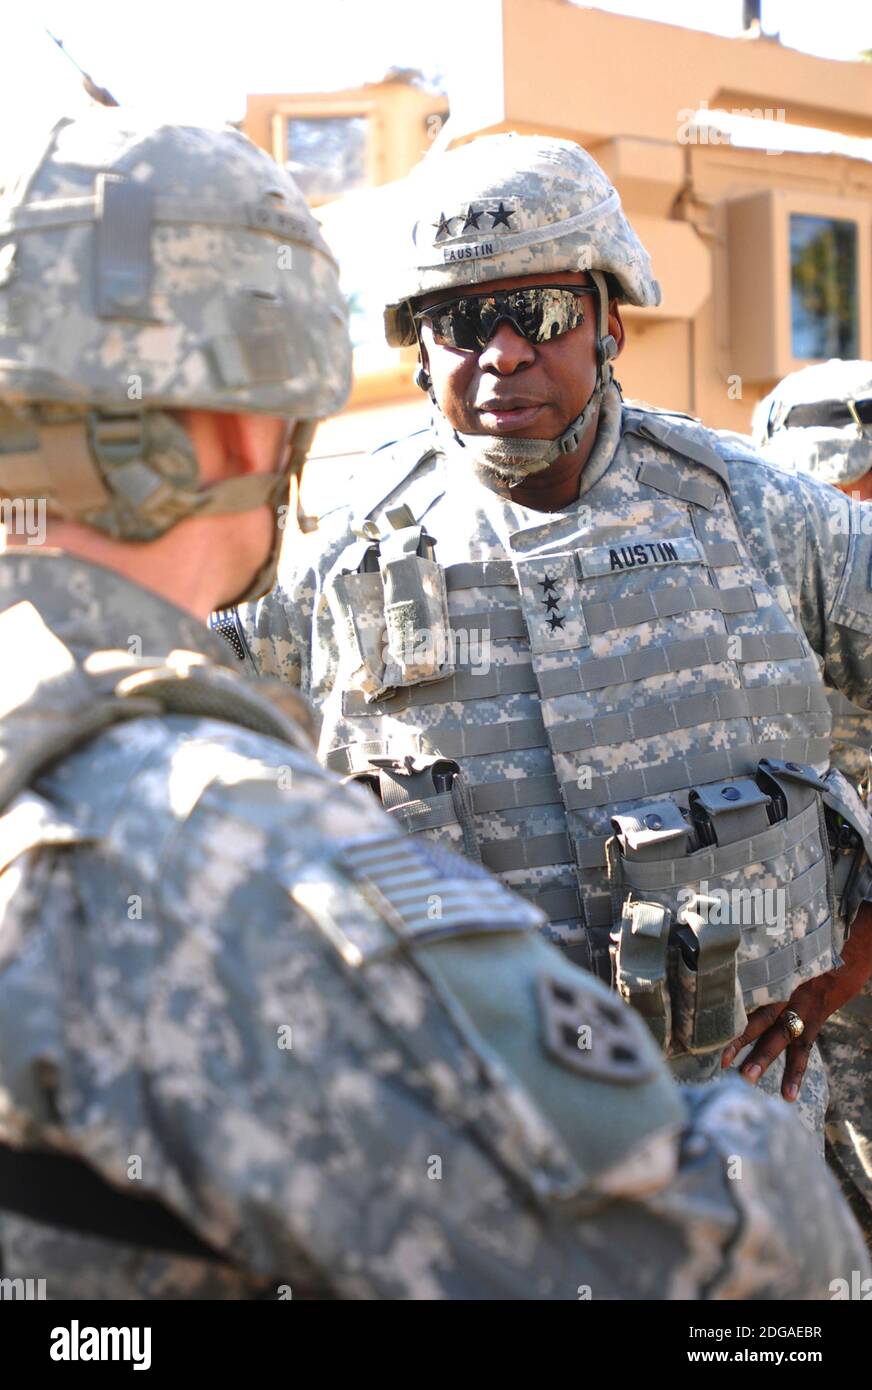 U.S. Army Lt. General Lloyd J. Austin III, right, commanding general, Multi-National Corps Iraq, visits with members of the 1st Battalion, 68th Infantry Regiment at Combat Outpost War Eagle December 11, 2008 in Adhamiyah, Iraq. Stock Photo